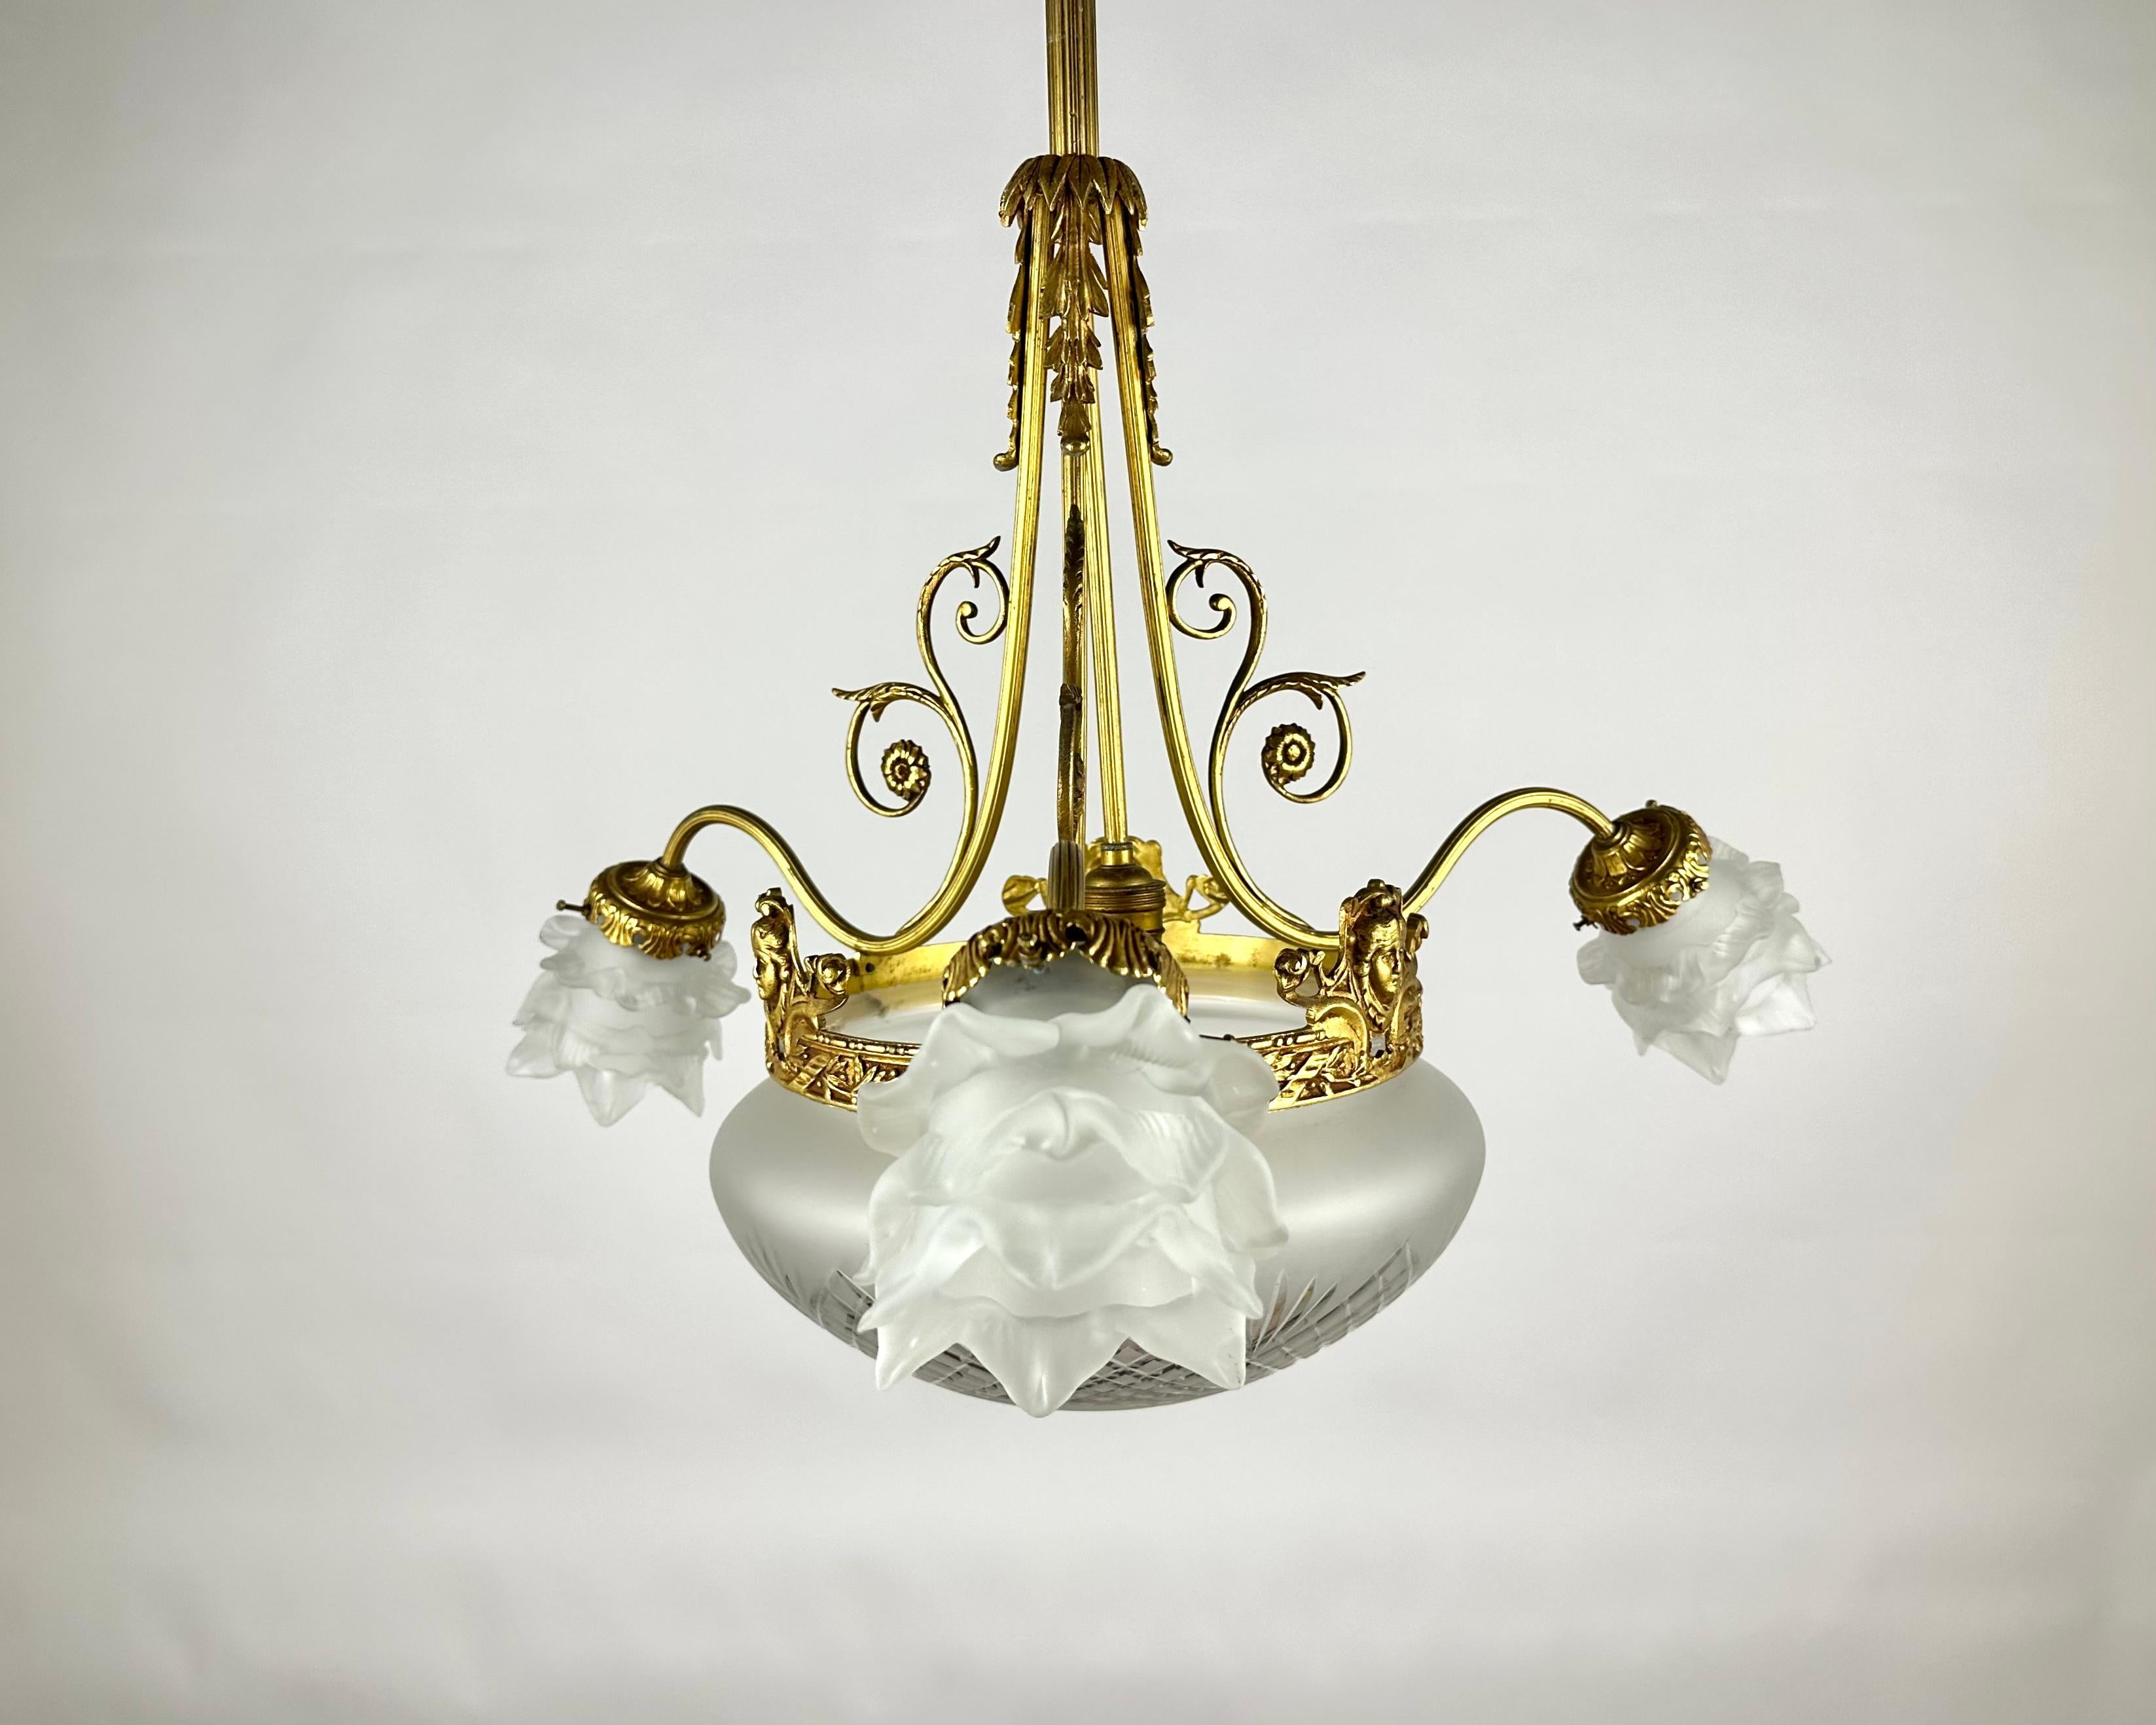 French Antique Art Deco Style Bronze & Glass Chandelier, France 1920s For Sale